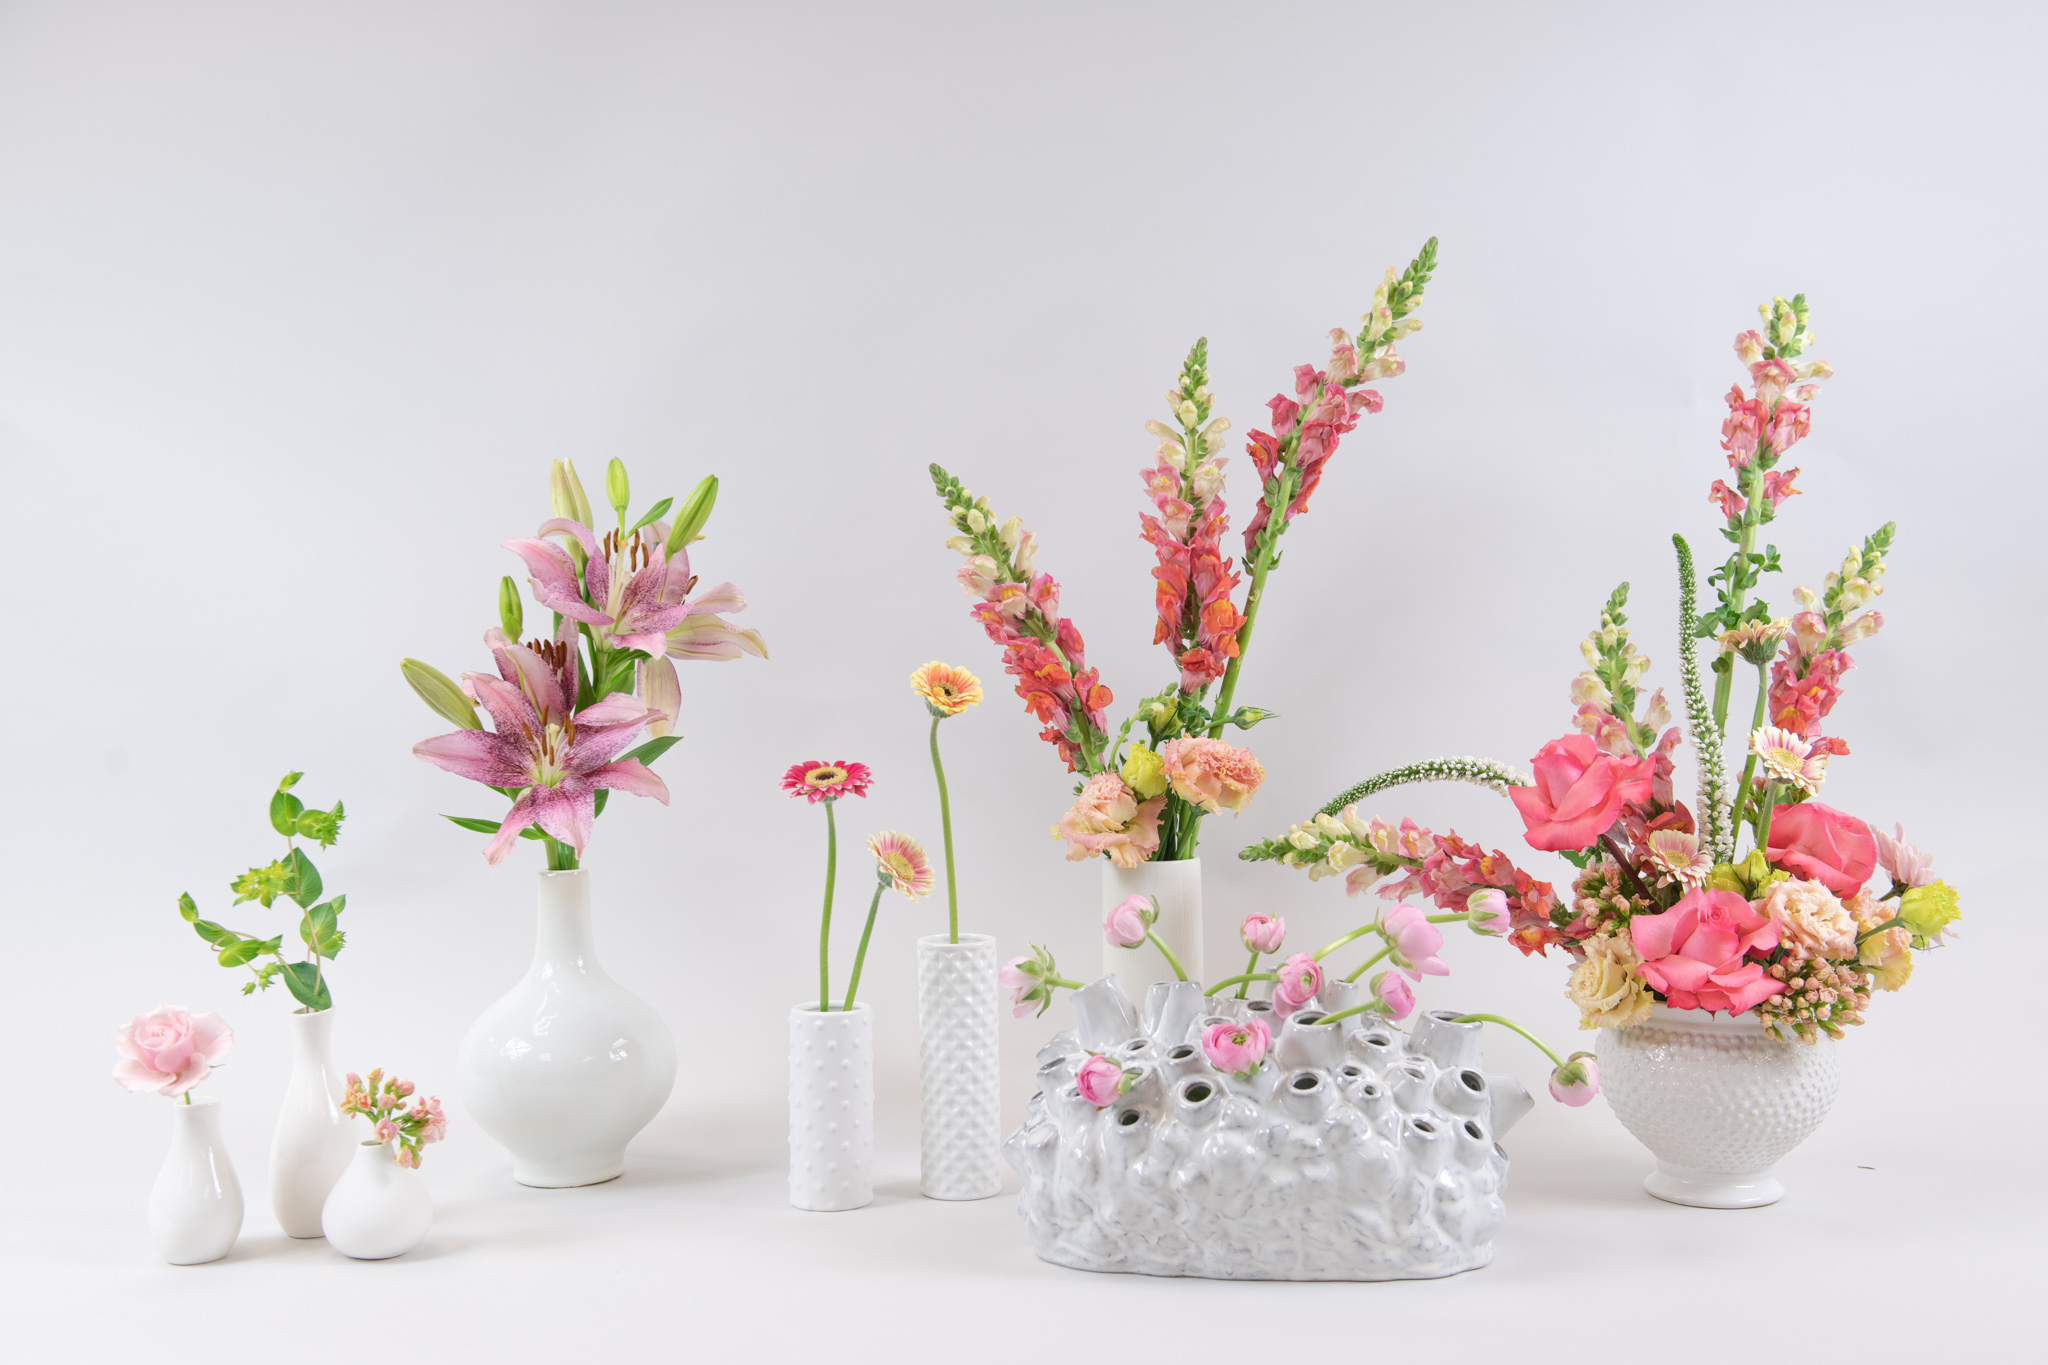 Create Gorgeous Decor This Galentine’s Day Using Fresh Cut Flowers